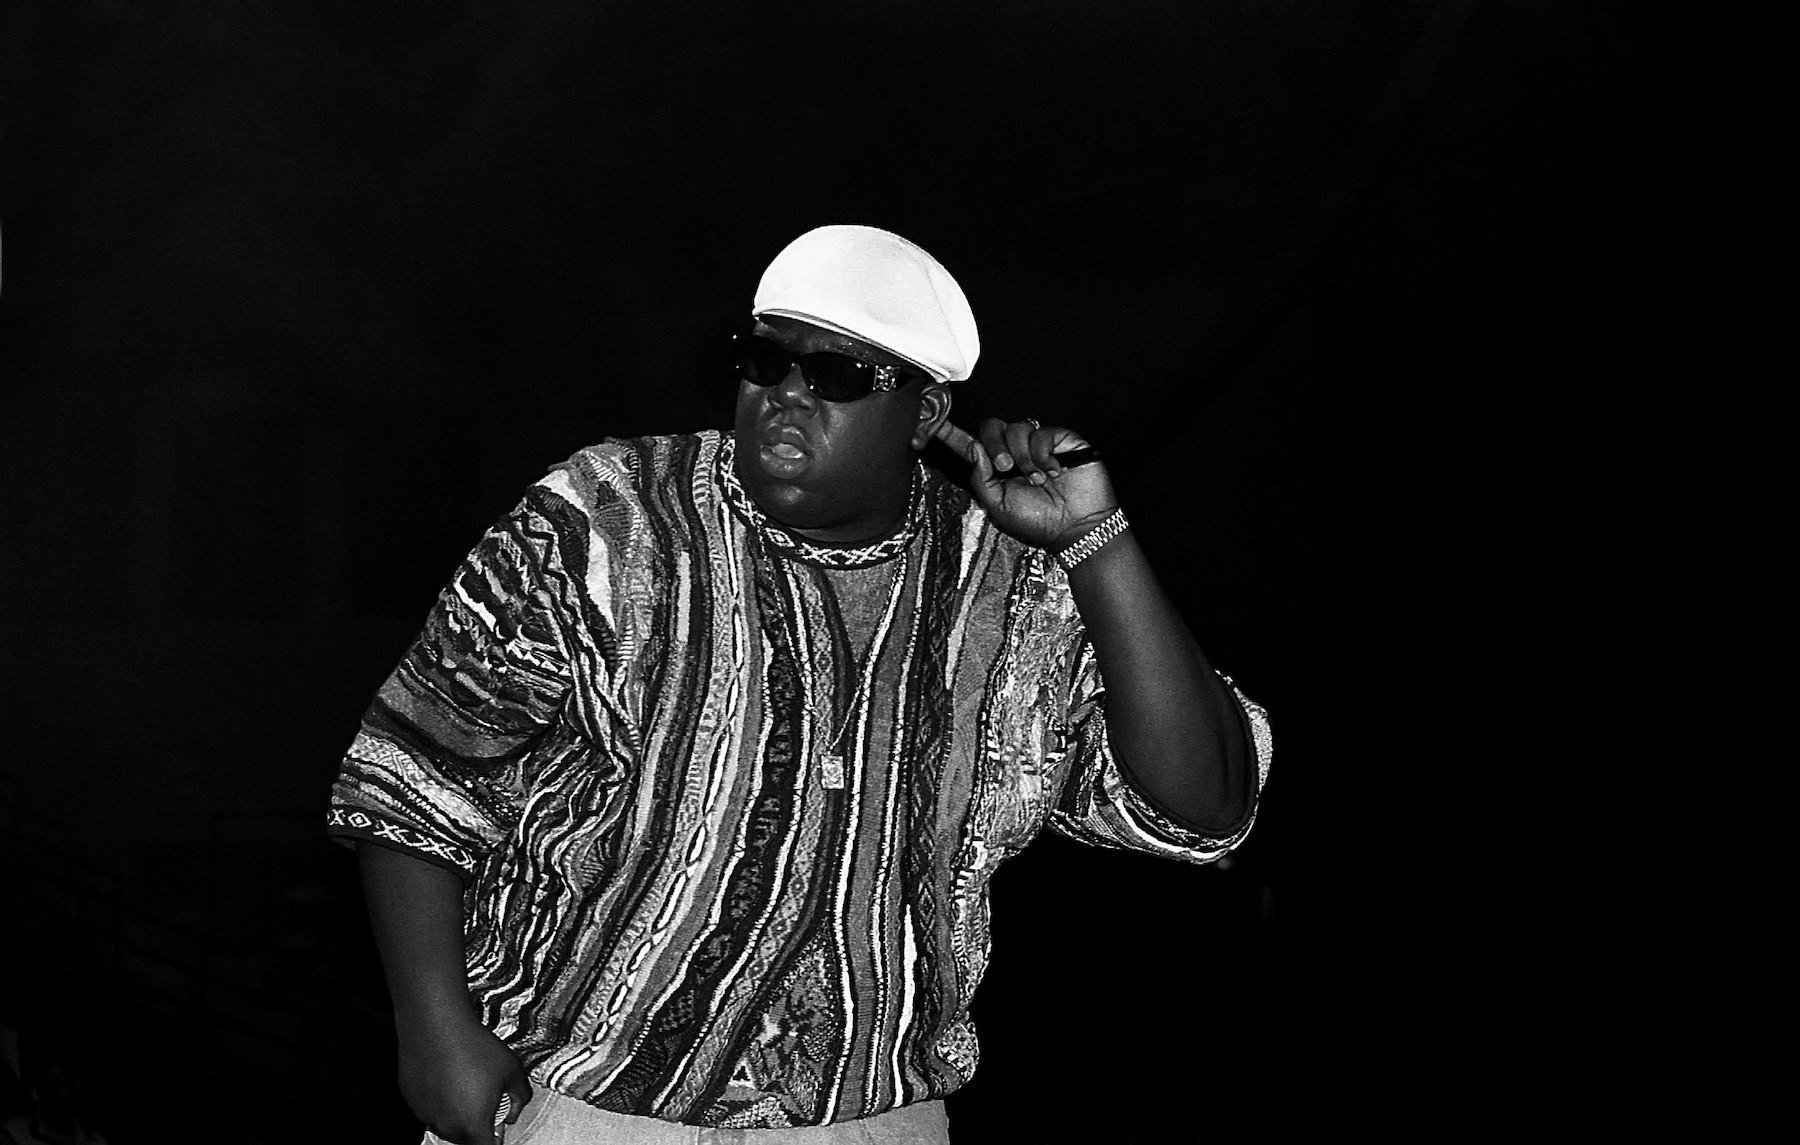 The Notorious B.I.G., rapper behind hit songs like 'Juicy' and 'Big Poppa,' on stage wearing a striped shirt and white hat